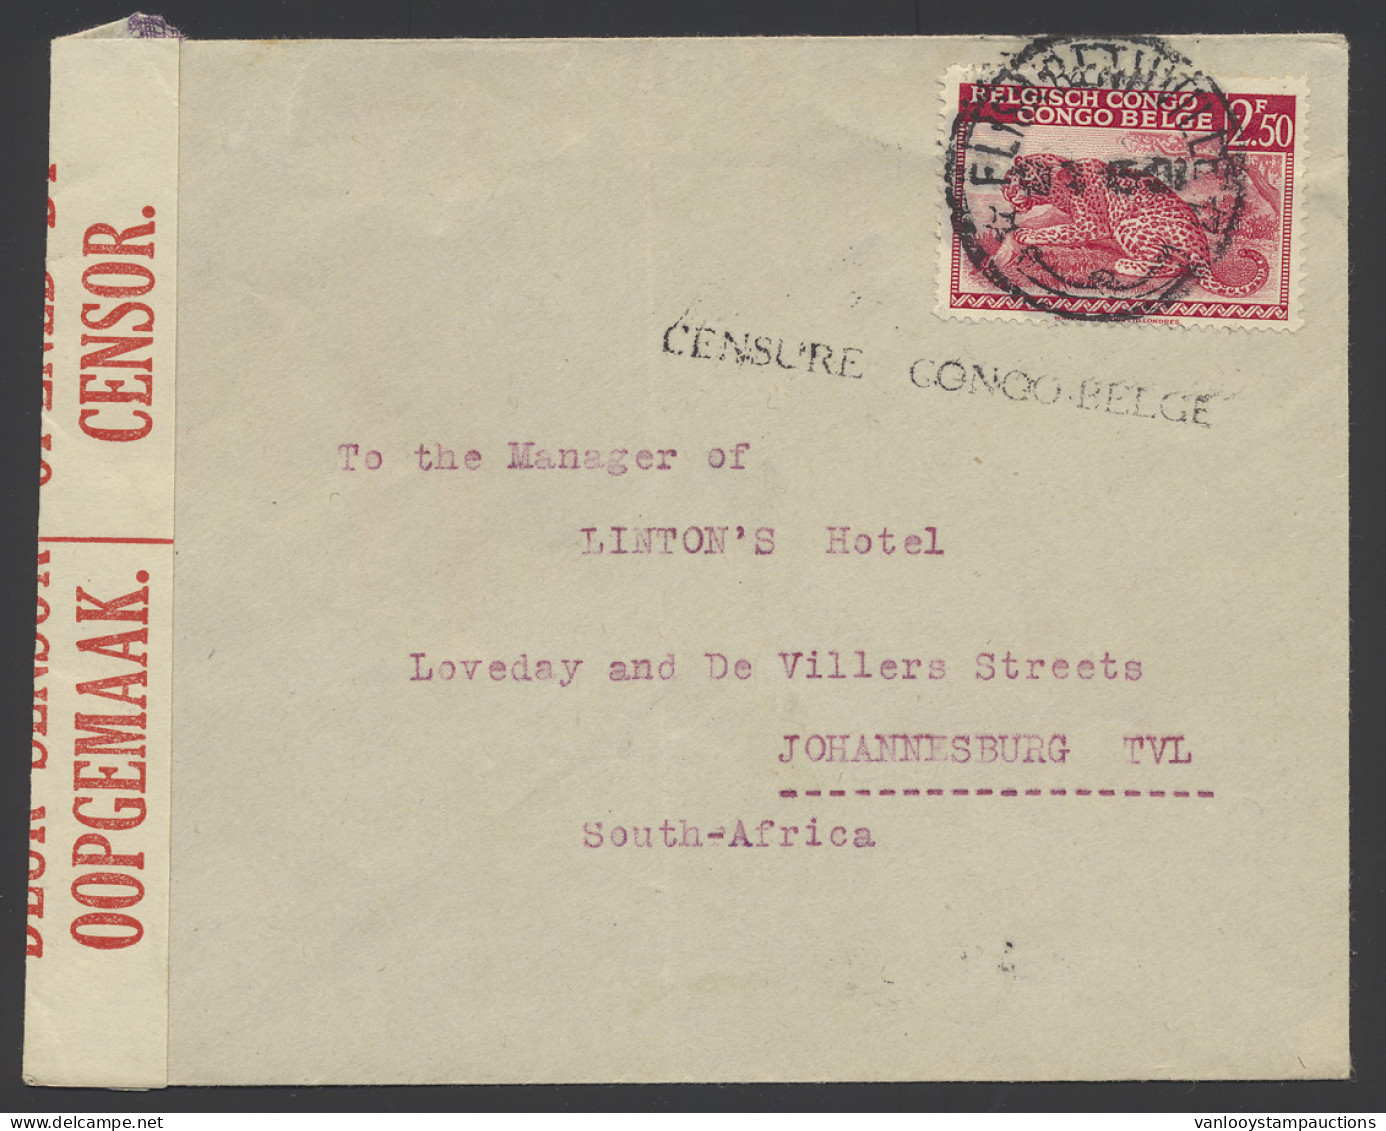 1945 Cover Franked With OBP N° 241 Sent From Elisabethville To Johannesburg/South Africa, Linear Censor Mark CENSURE CON - Lettres & Documents